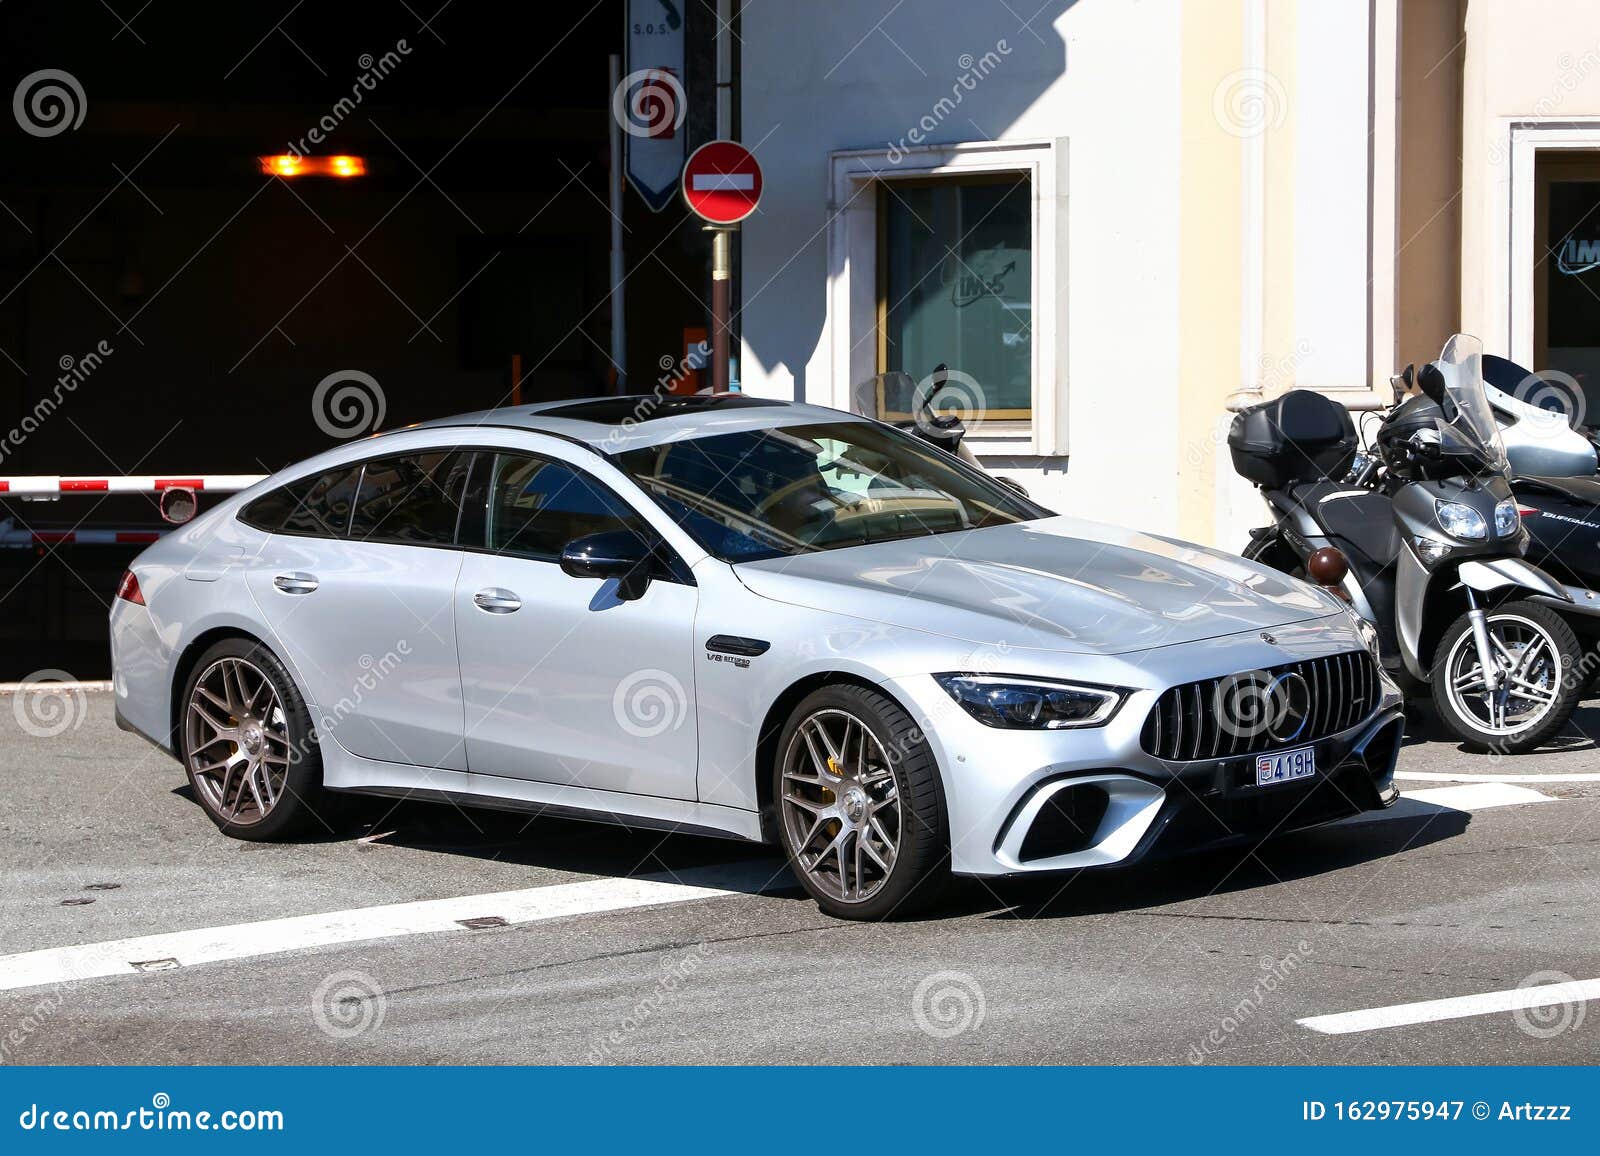 Mercedes Benz Amg Gt 4 Door Coupe Editorial Photography Image Of Grey Mercedes